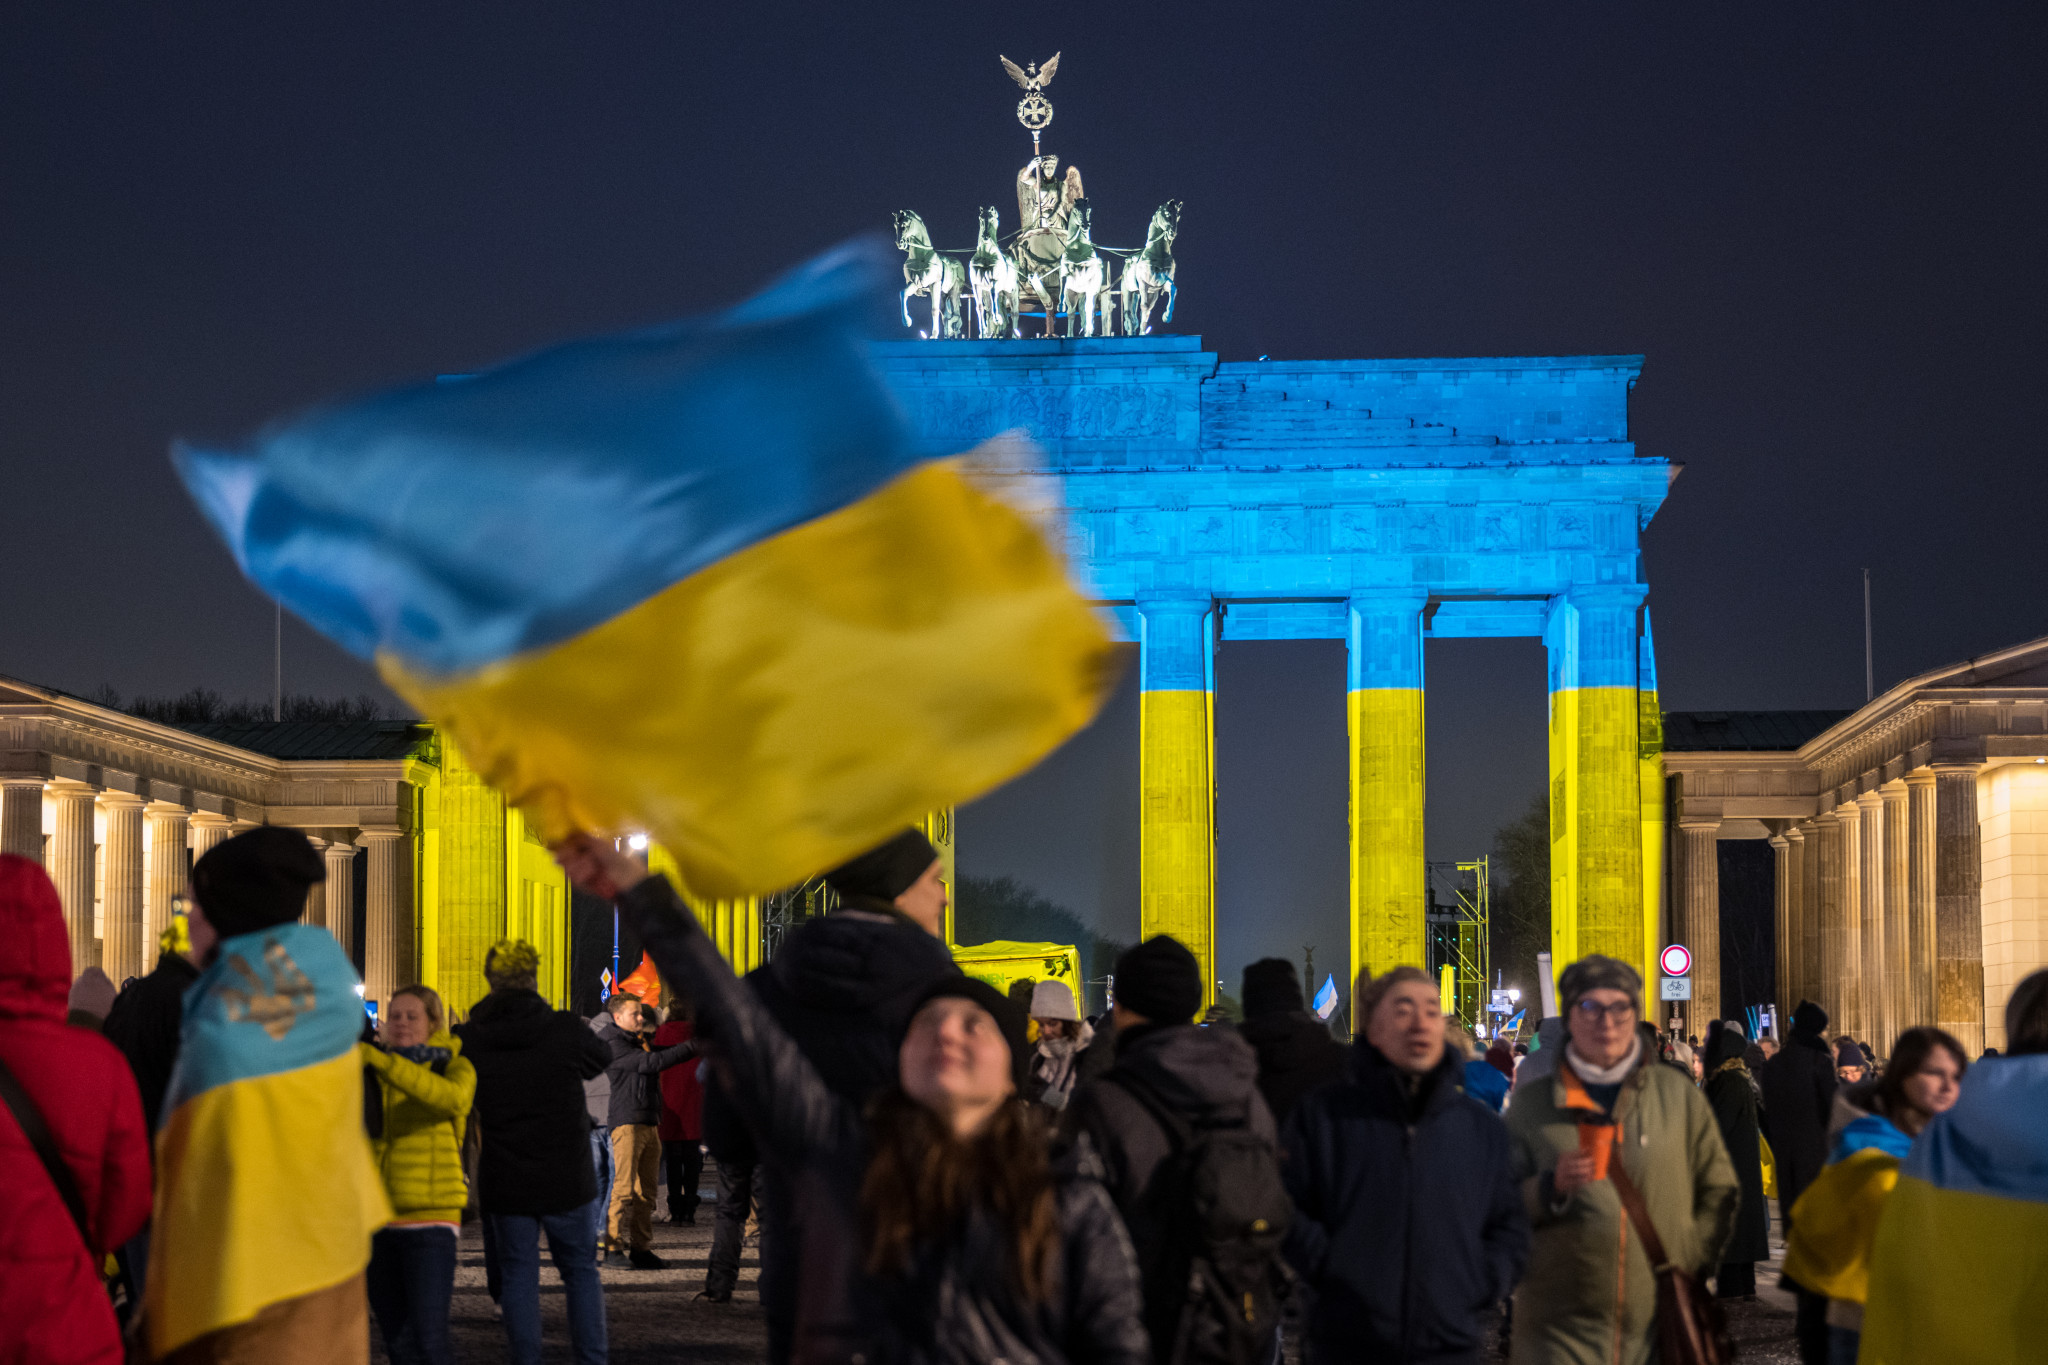 Last month, the Brandenburg Gate in Berlin was illuminated to mark one year since the invasion as a symbol of Germany's support of Ukraine ©Getty Images